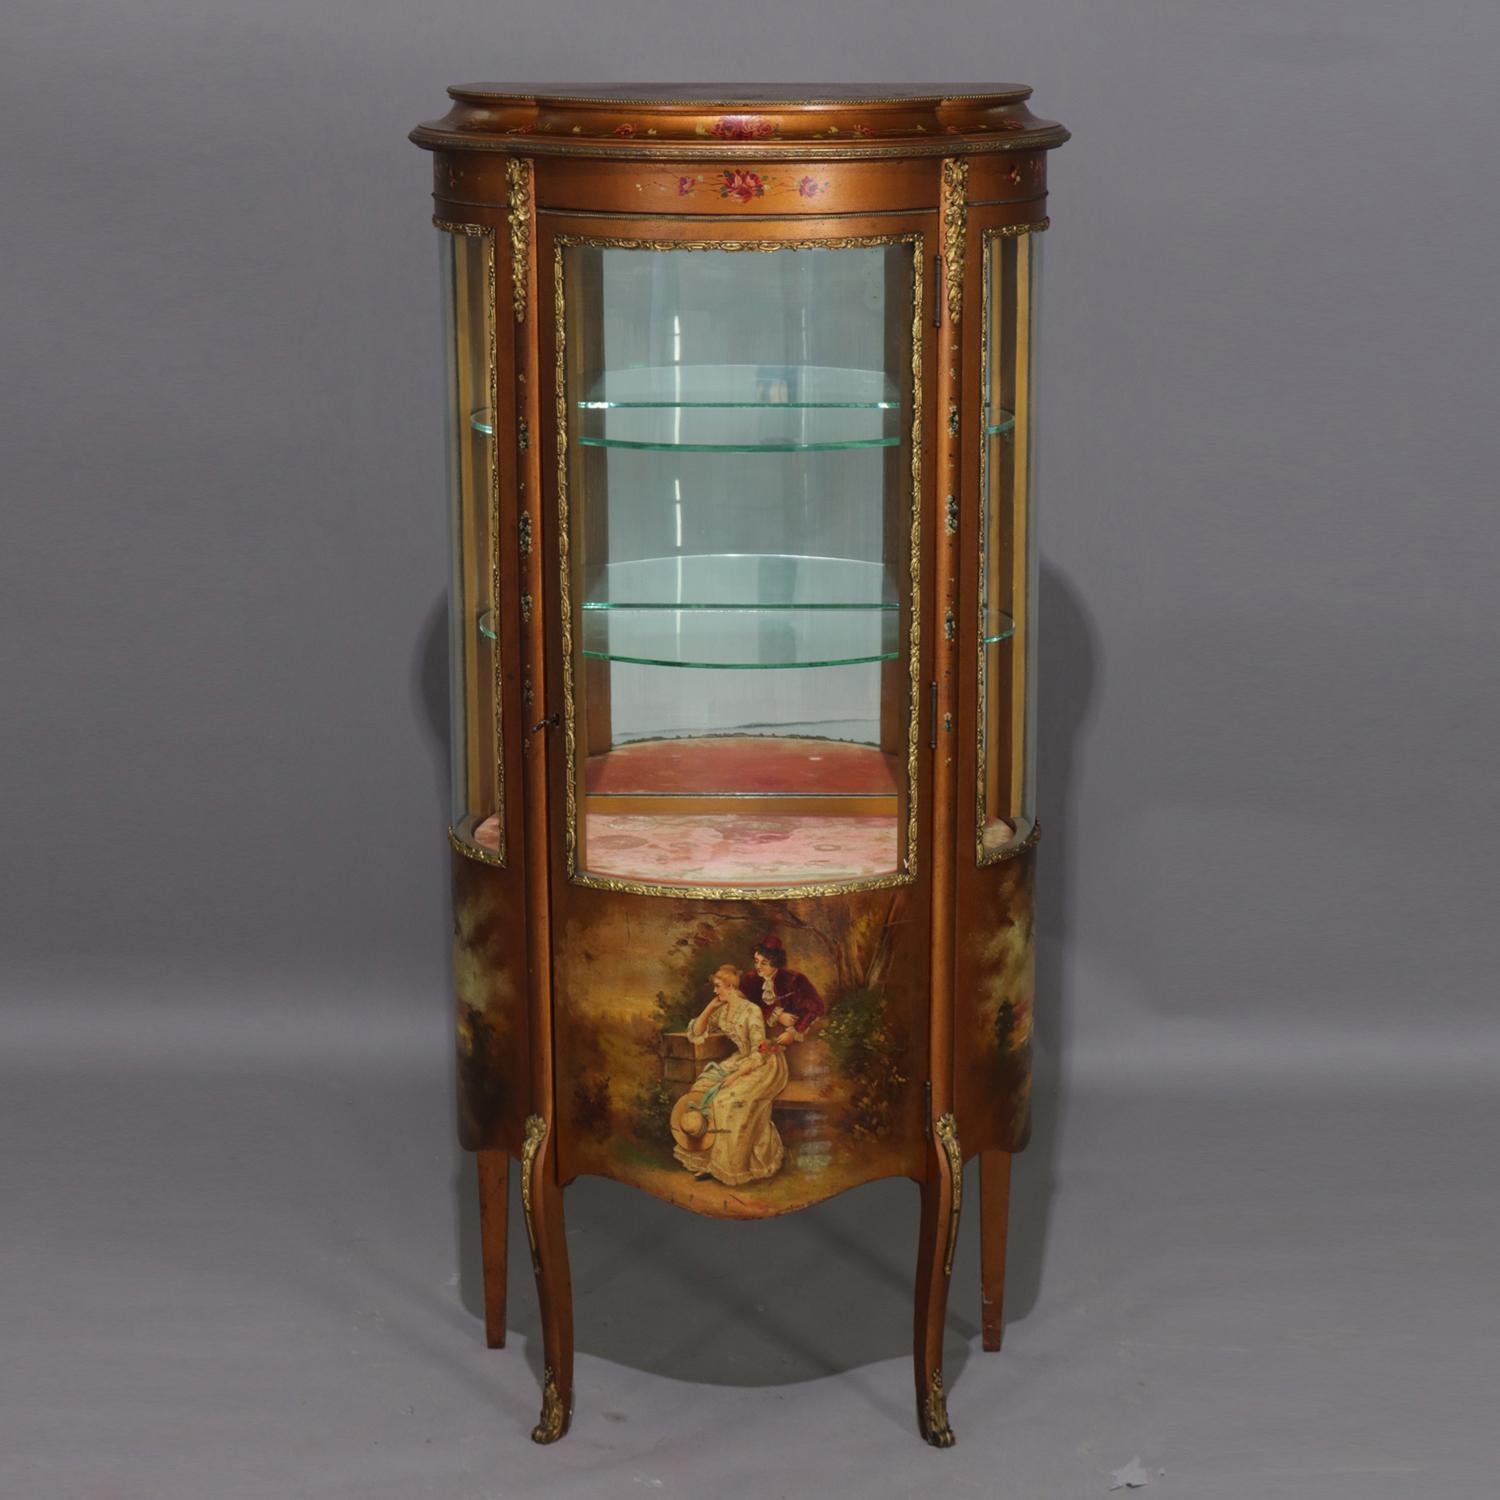 Antique French Louis XV Vernis Martin style vitrine features giltwood with hand-painted courting and landscape scene, single glass door opening to mirrored interior with glass display shelves, seated on cabriole legs, foliate ormolu mounts